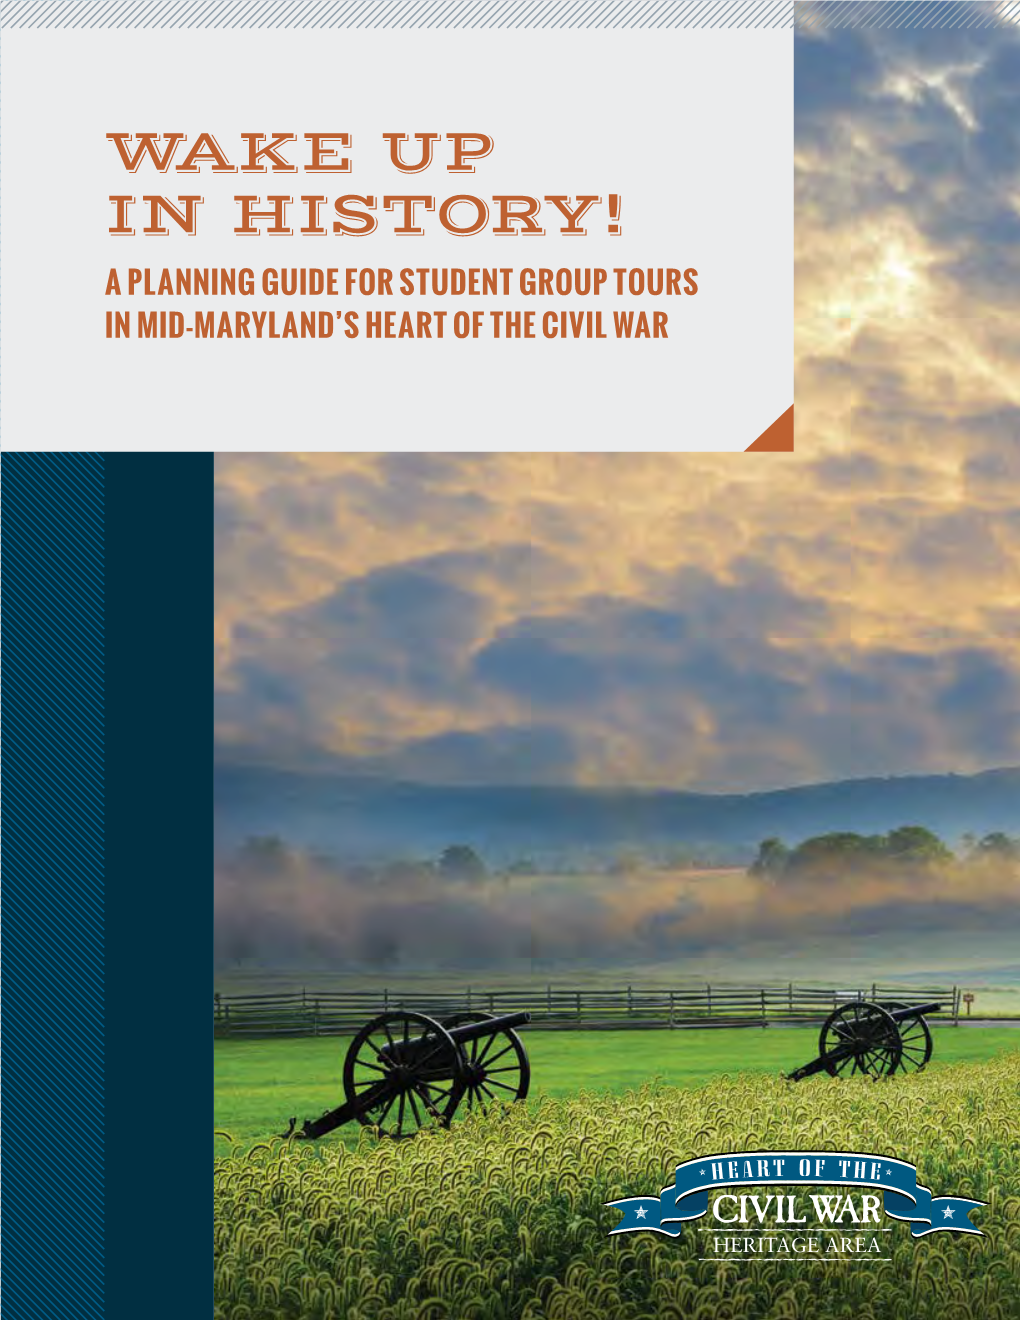 WAKE up in HISTORY! a PLANNING GUIDE for STUDENT GROUP TOURS in MID-MARYLAND’S HEART of the CIVIL WAR 2 Heart of the Civil War Heritage Area | Attractions